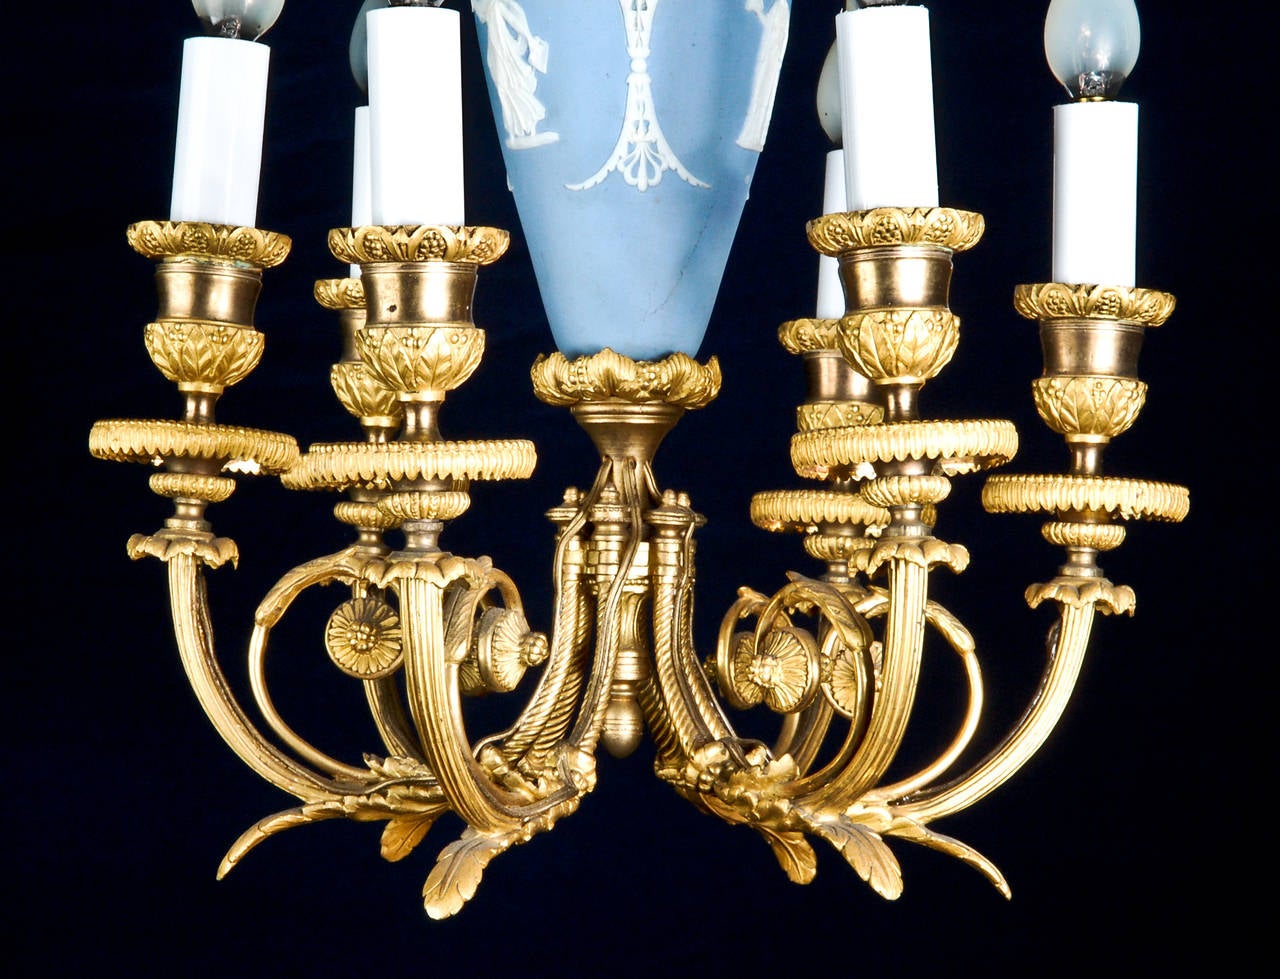 Fine Antique French Louis XVI Style Gilt Bronze and Wedgewood Chandelier In Good Condition For Sale In New York, NY